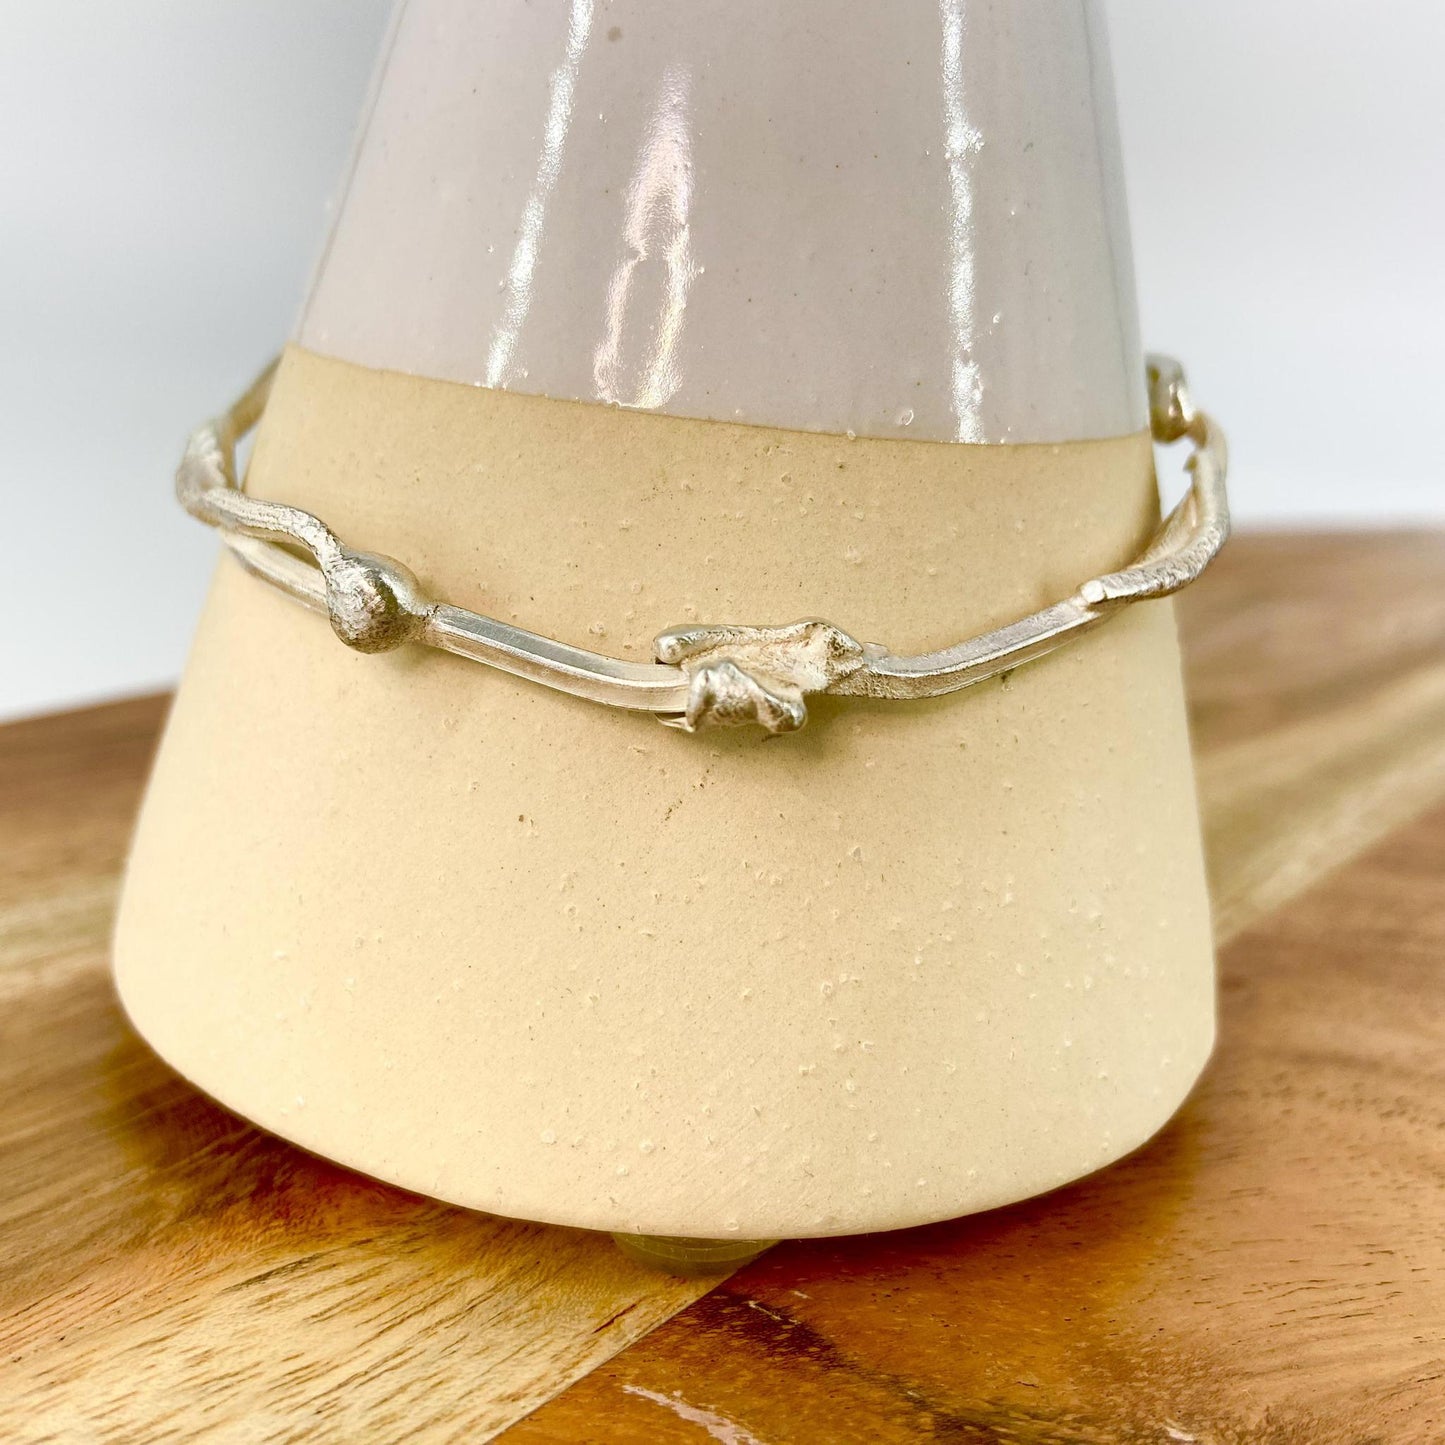 Bangle - "Twig" - Sterling Silver